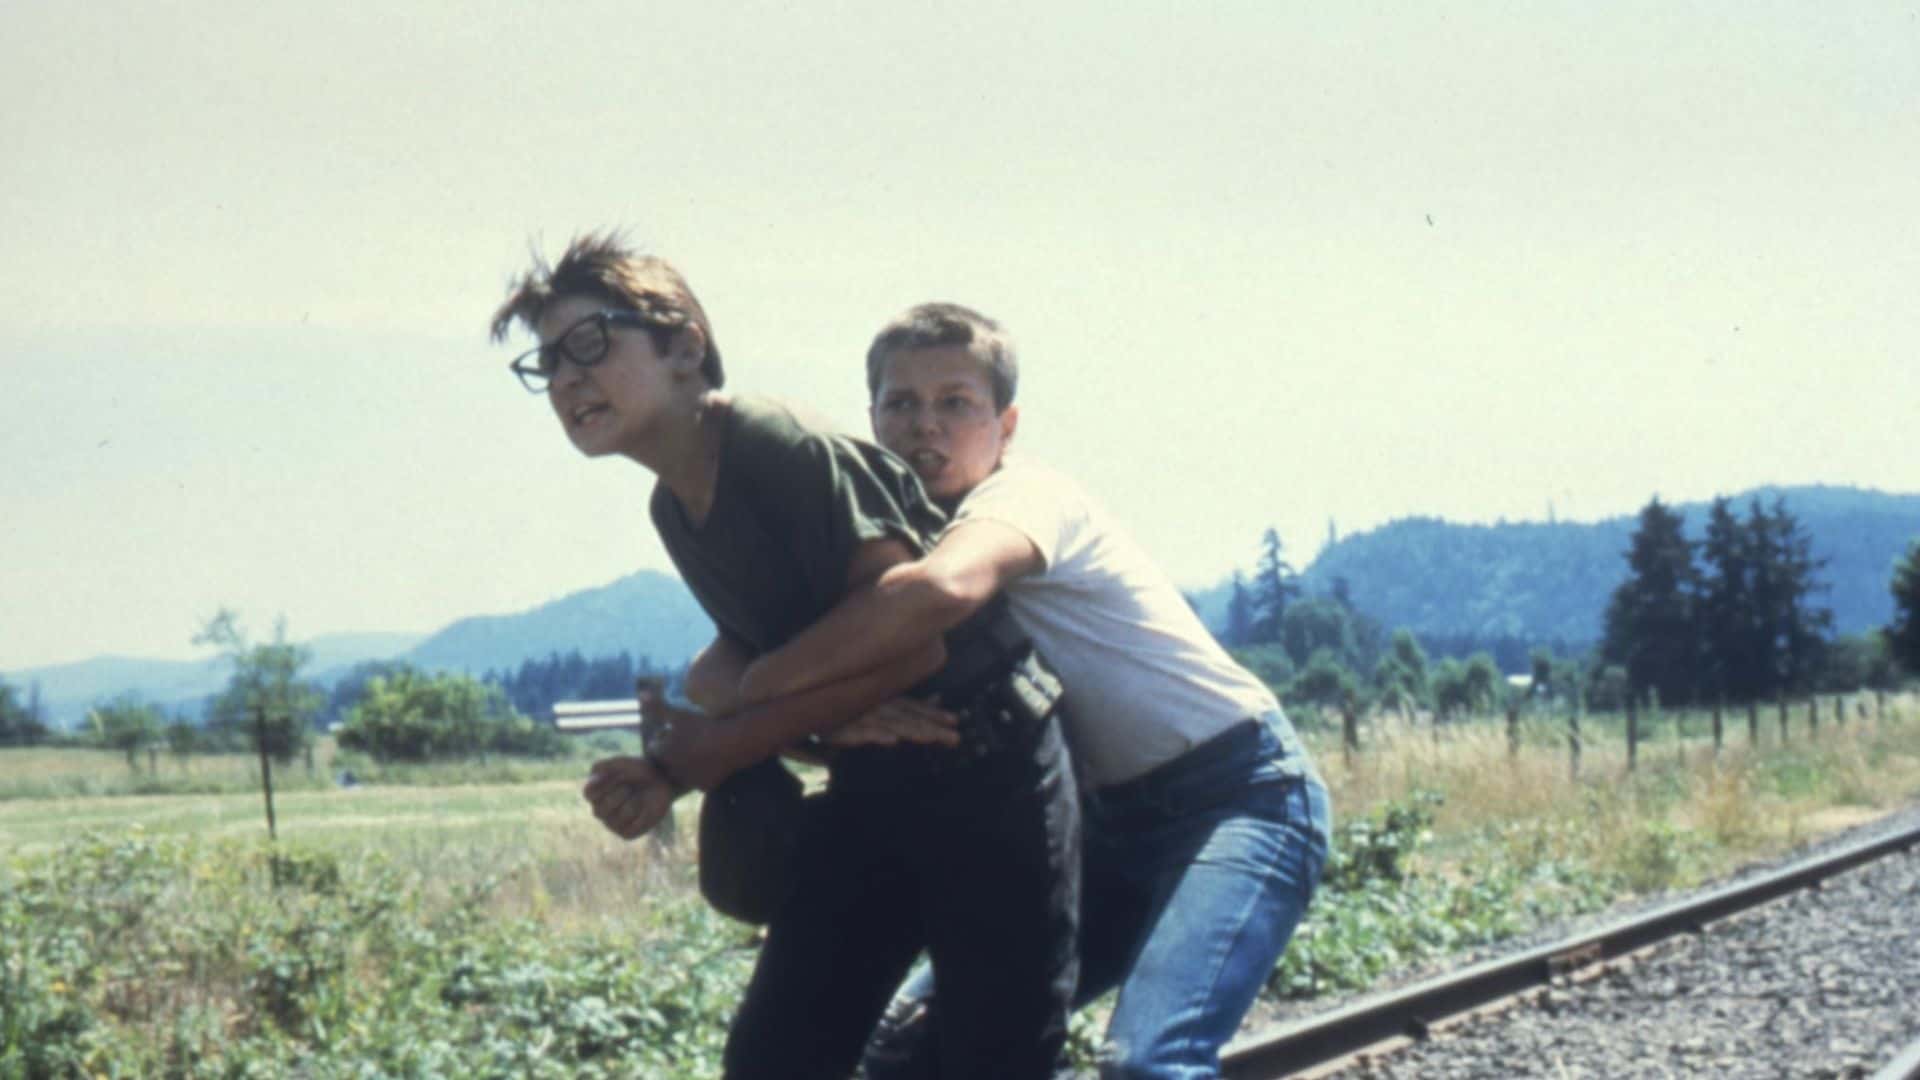 Two young boys struggle on train tracks in this image from Act III Productions.